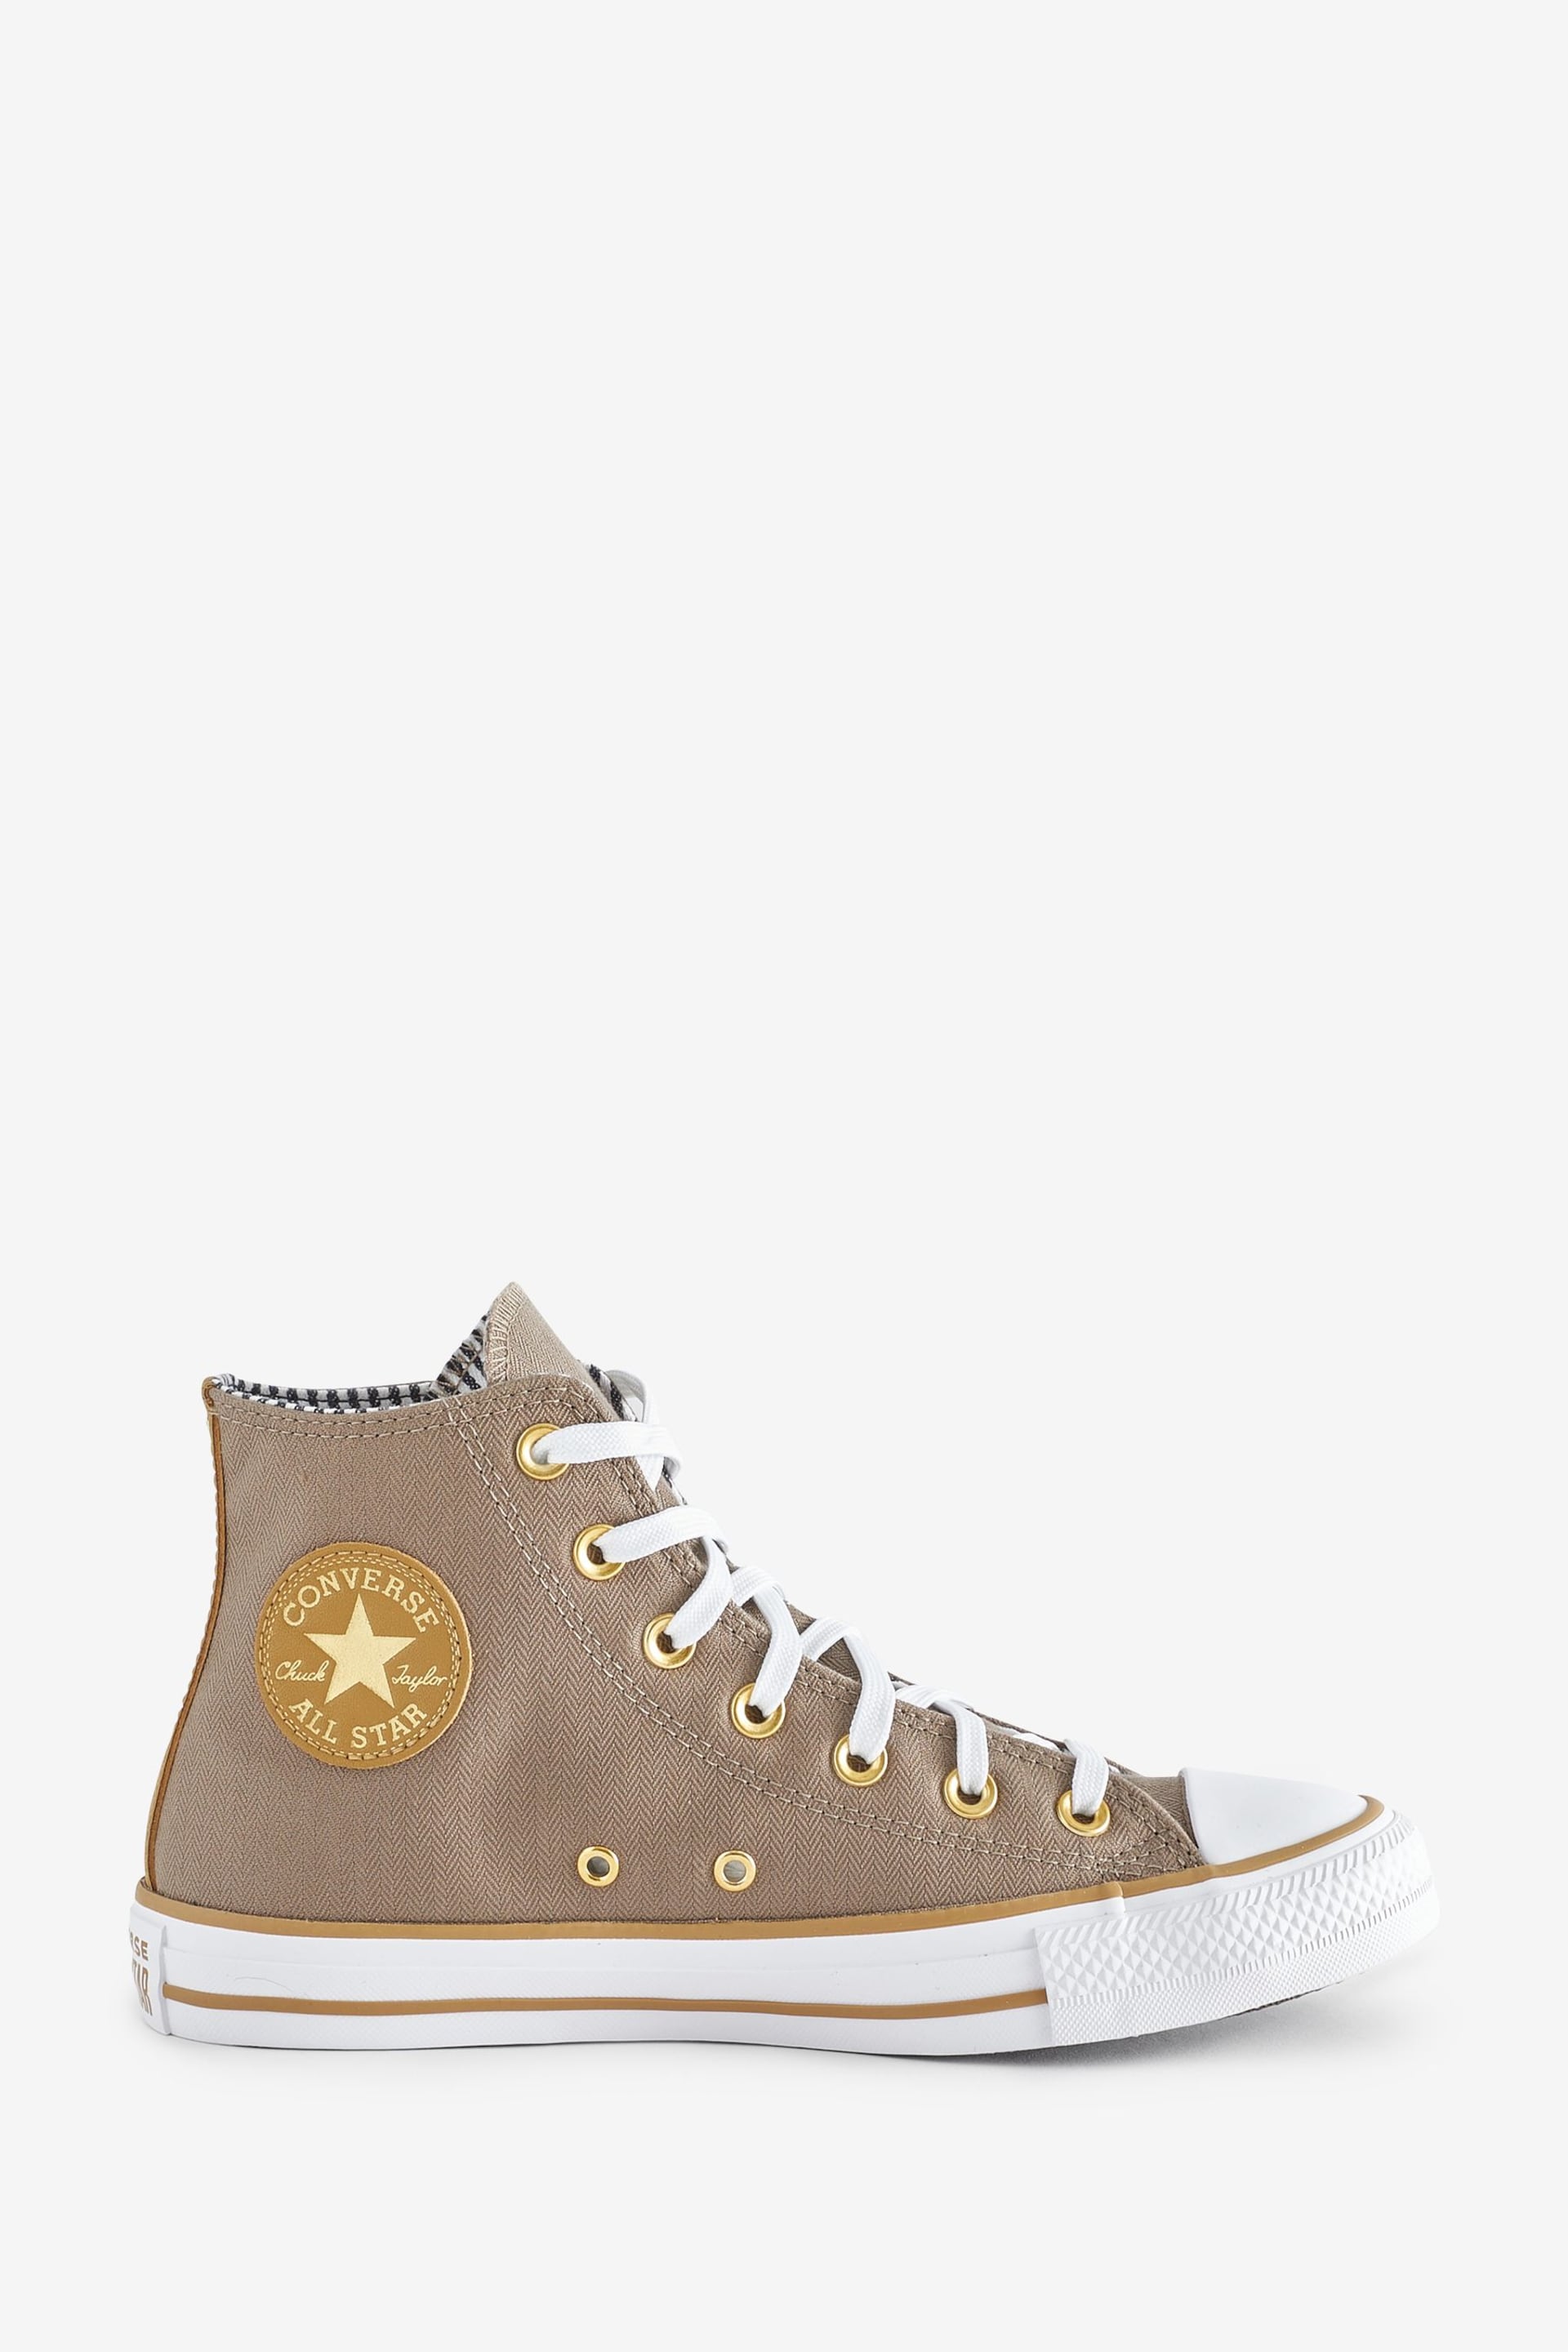 Converse Neutral Chuck Taylor All Star Trainers - Image 1 of 9